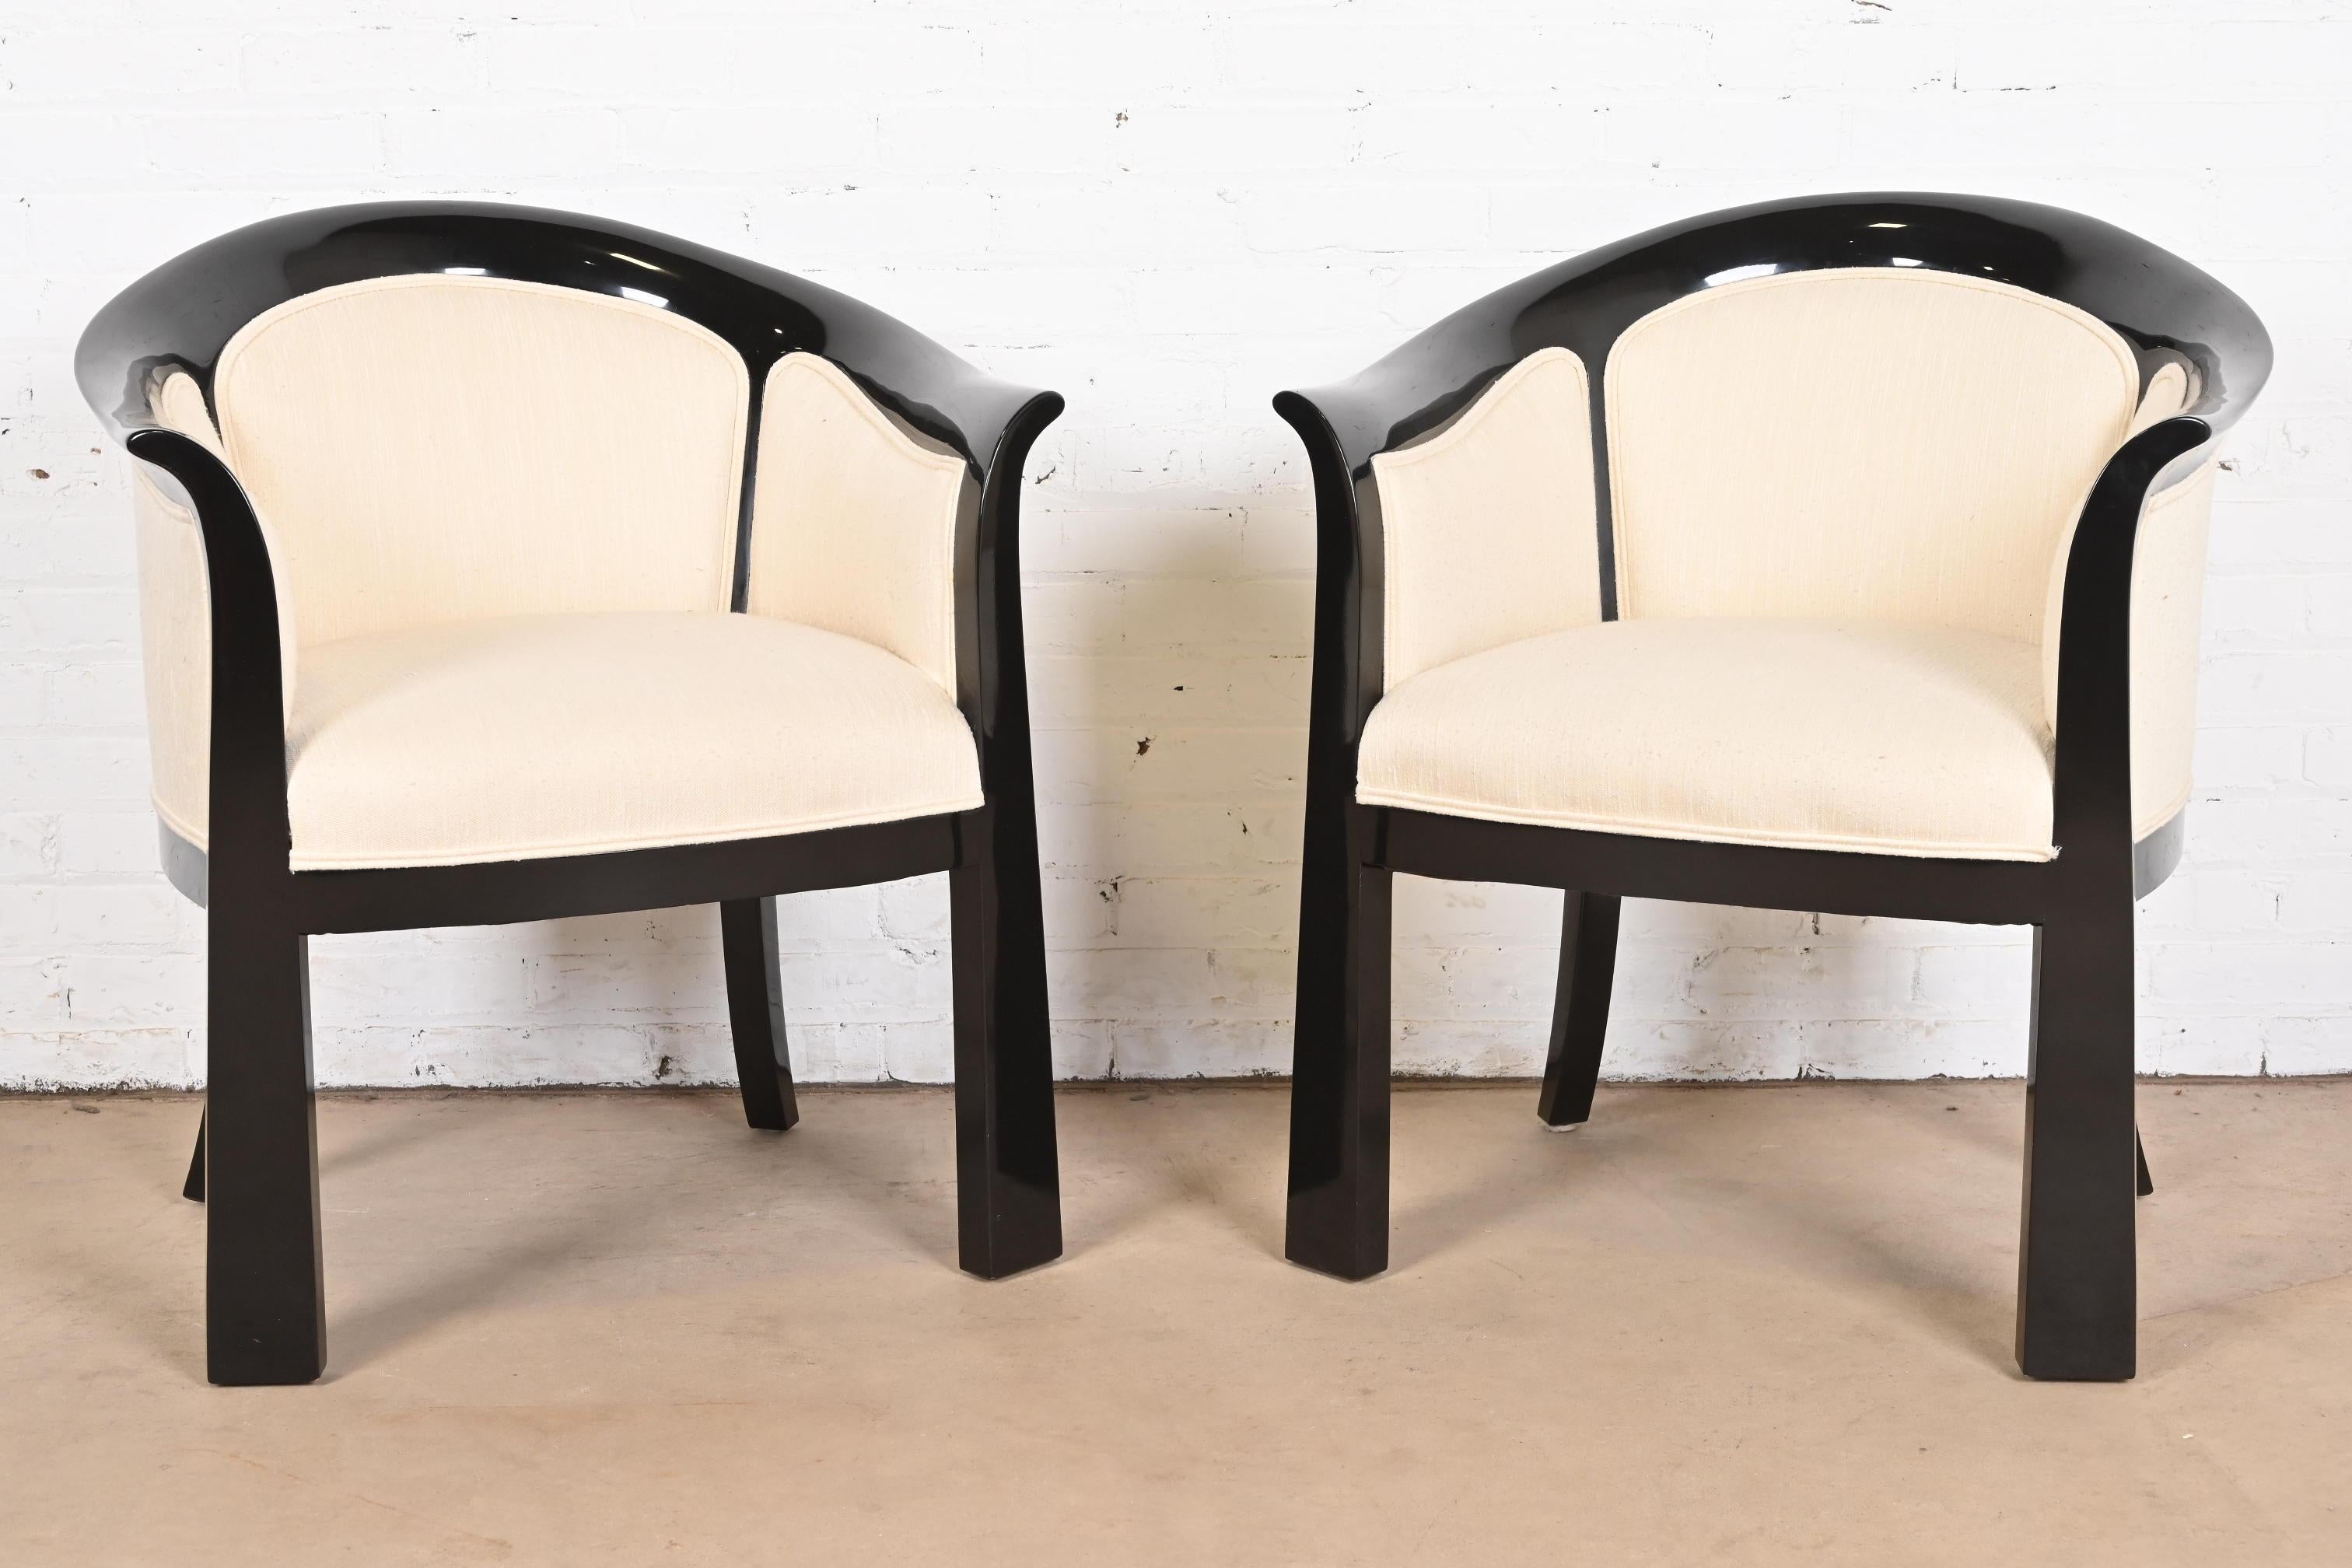 American Interior Crafts Modern Art Deco Black Lacquered Tub Chairs, Pair